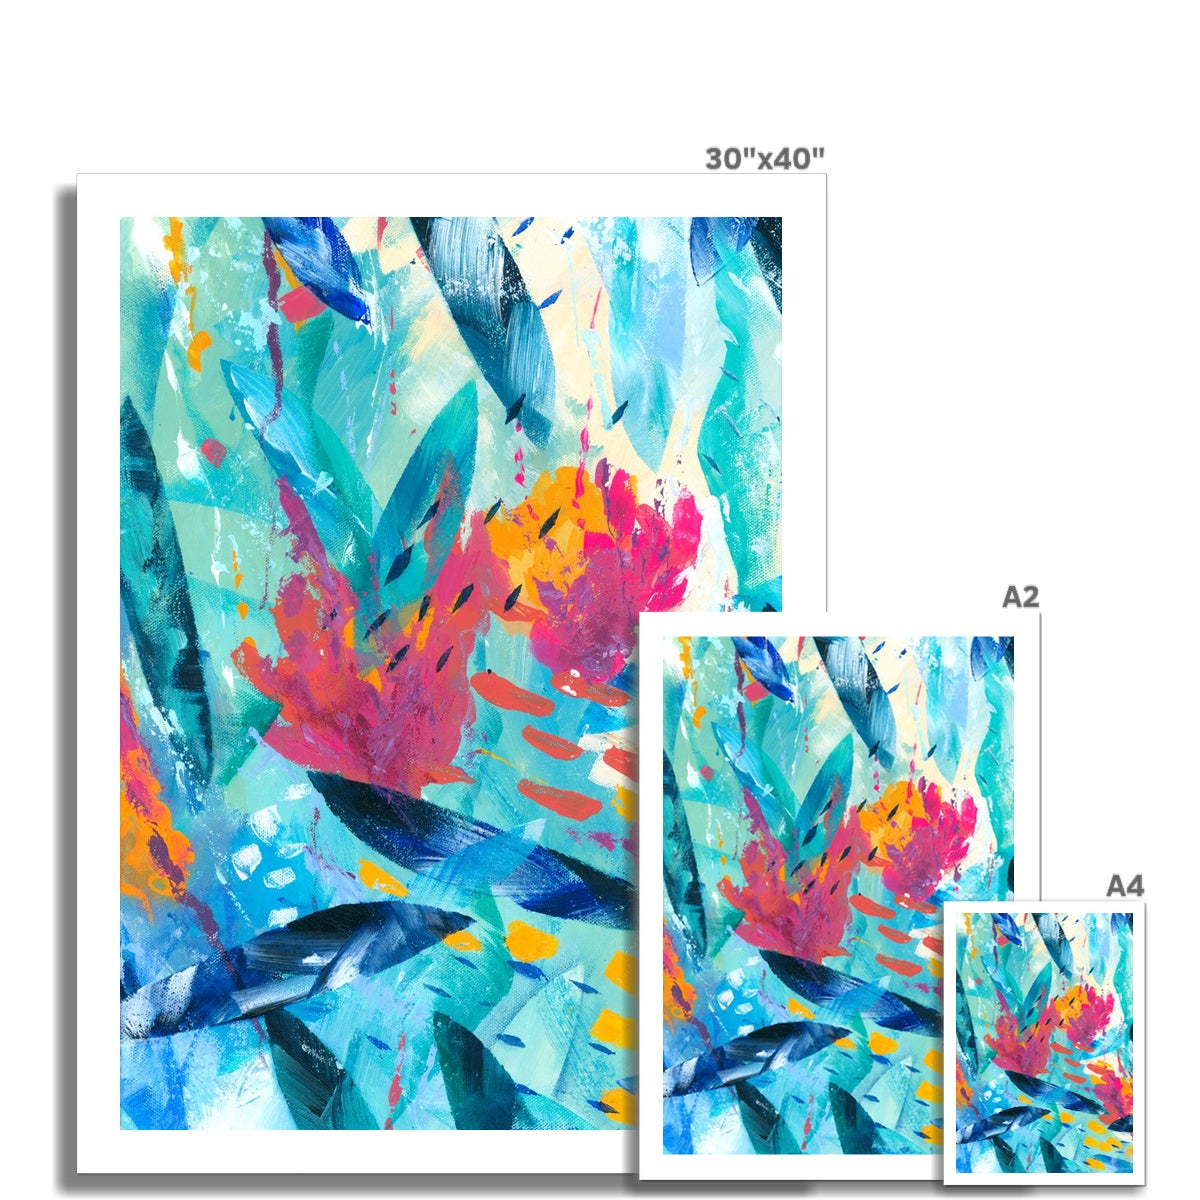 Tropical Seas fine art print shown in different sizes, to scale with one another.